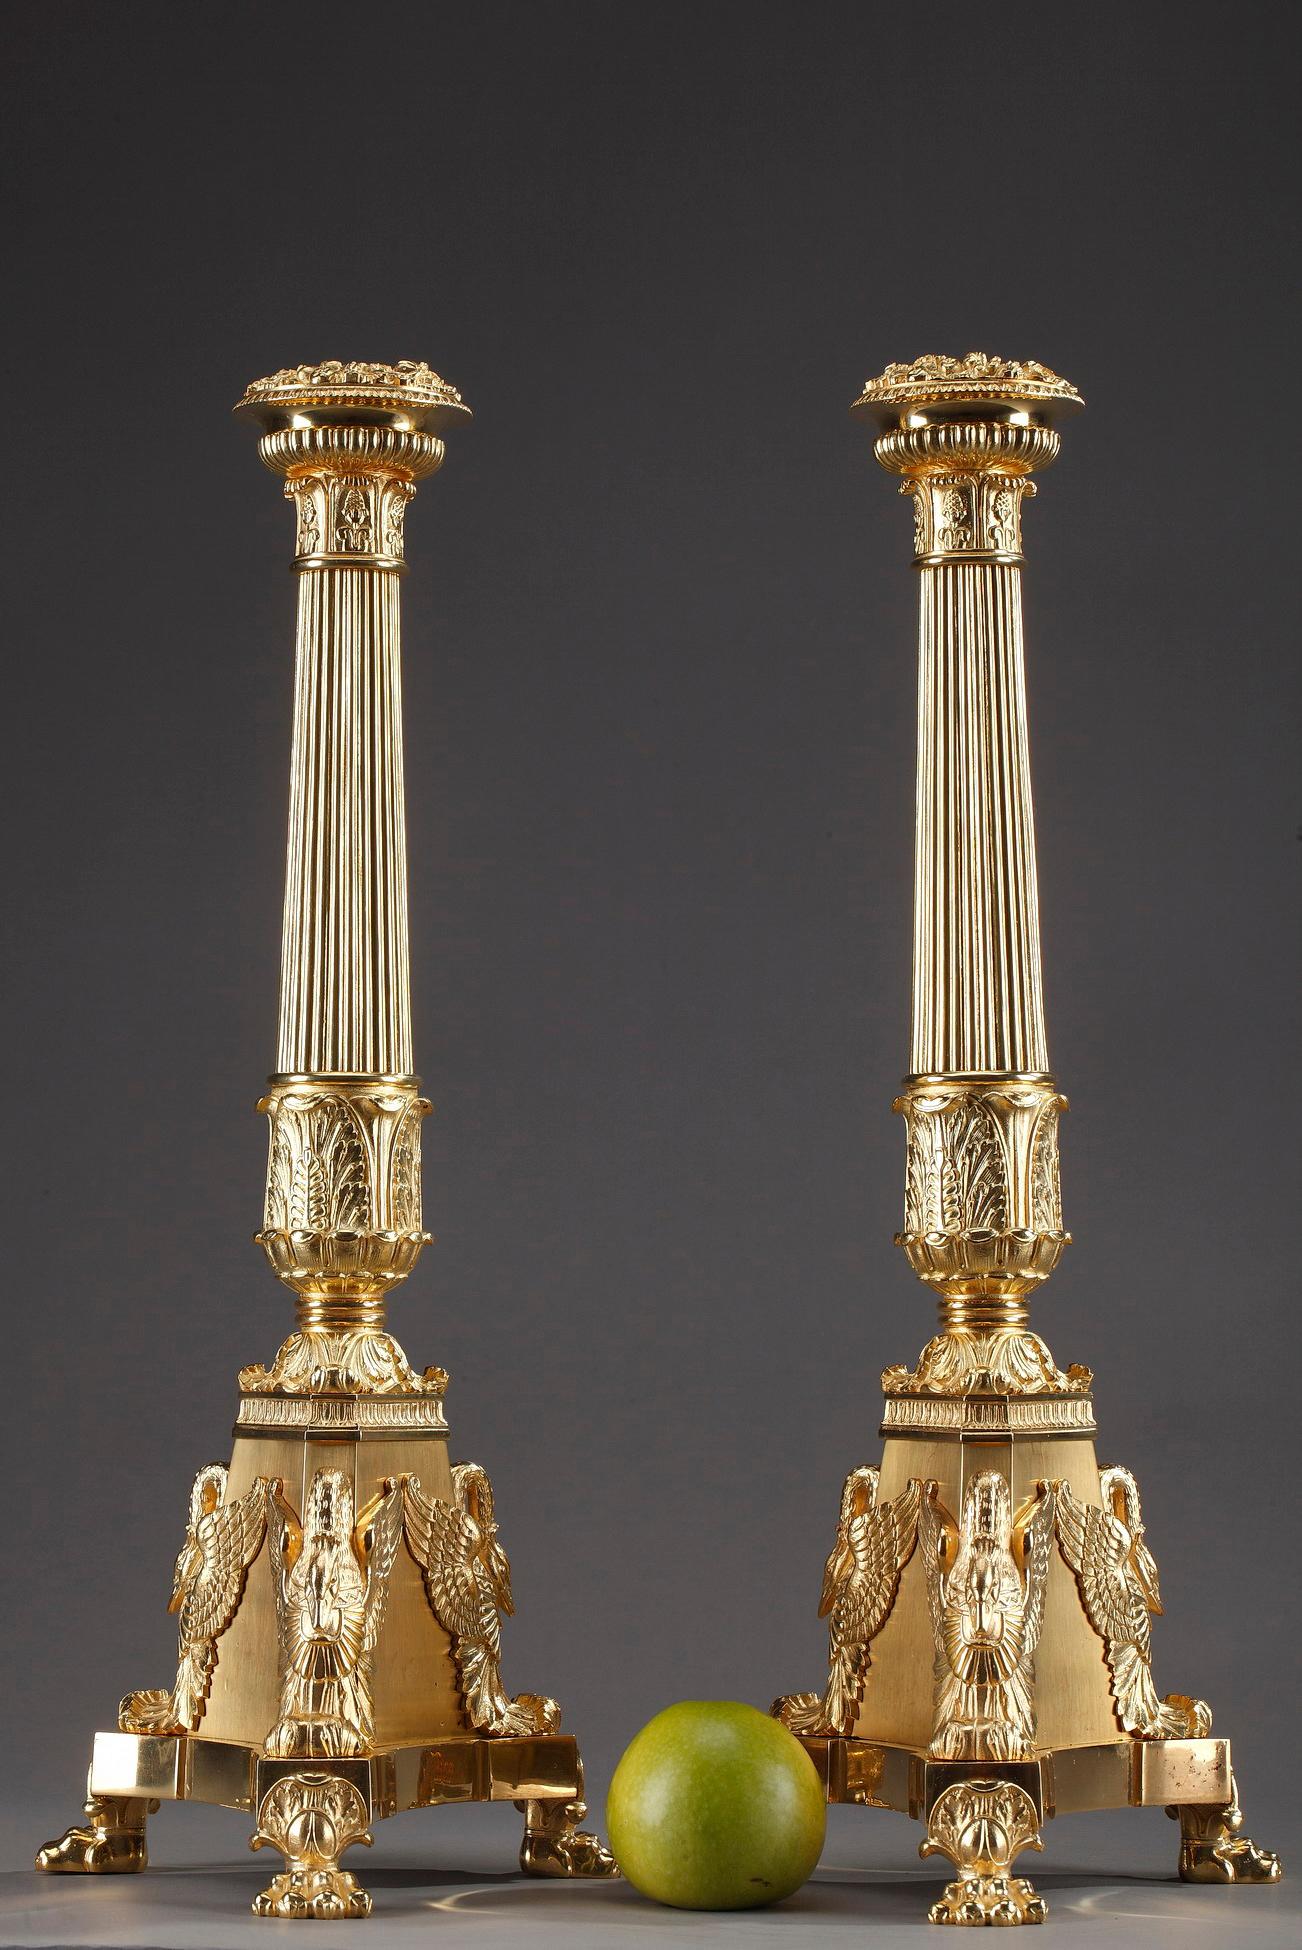 Large candelabra in gilt and chiselled bronze from the Restauration period. The fluted stems of the candlesticks are embellished with pines, palmette and acanthus leaves. The nozzle is topped with a rich ring of flowers and fruits. Each candelabra